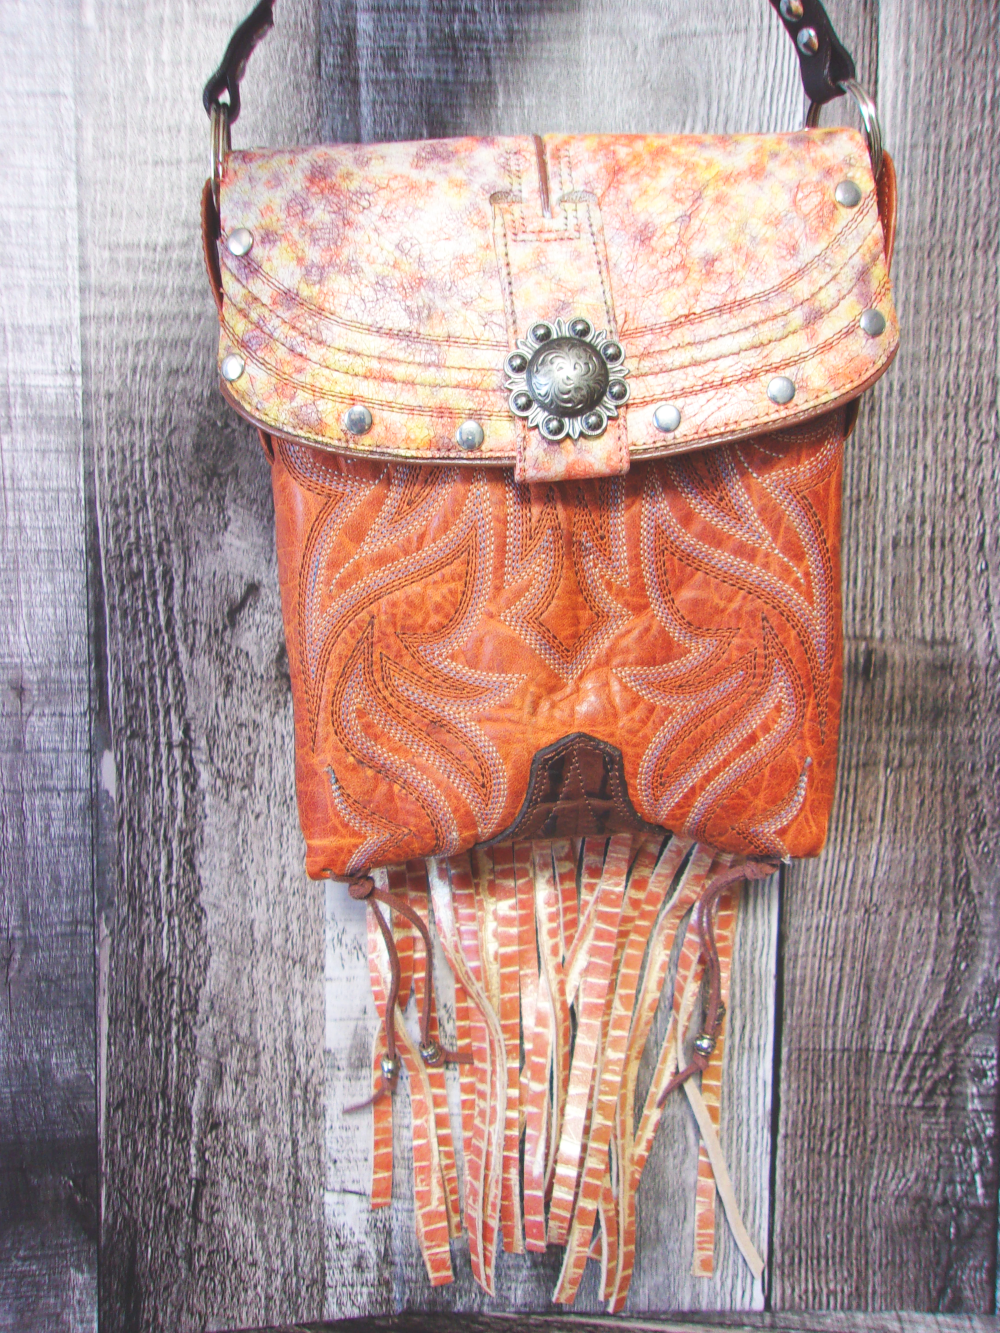 Small Cowboy Boot Purse with Fringe sm237 handcrafted from cowboy boots. Shop all unique leather western handbags, purses and totes at Chris Thompson Bags